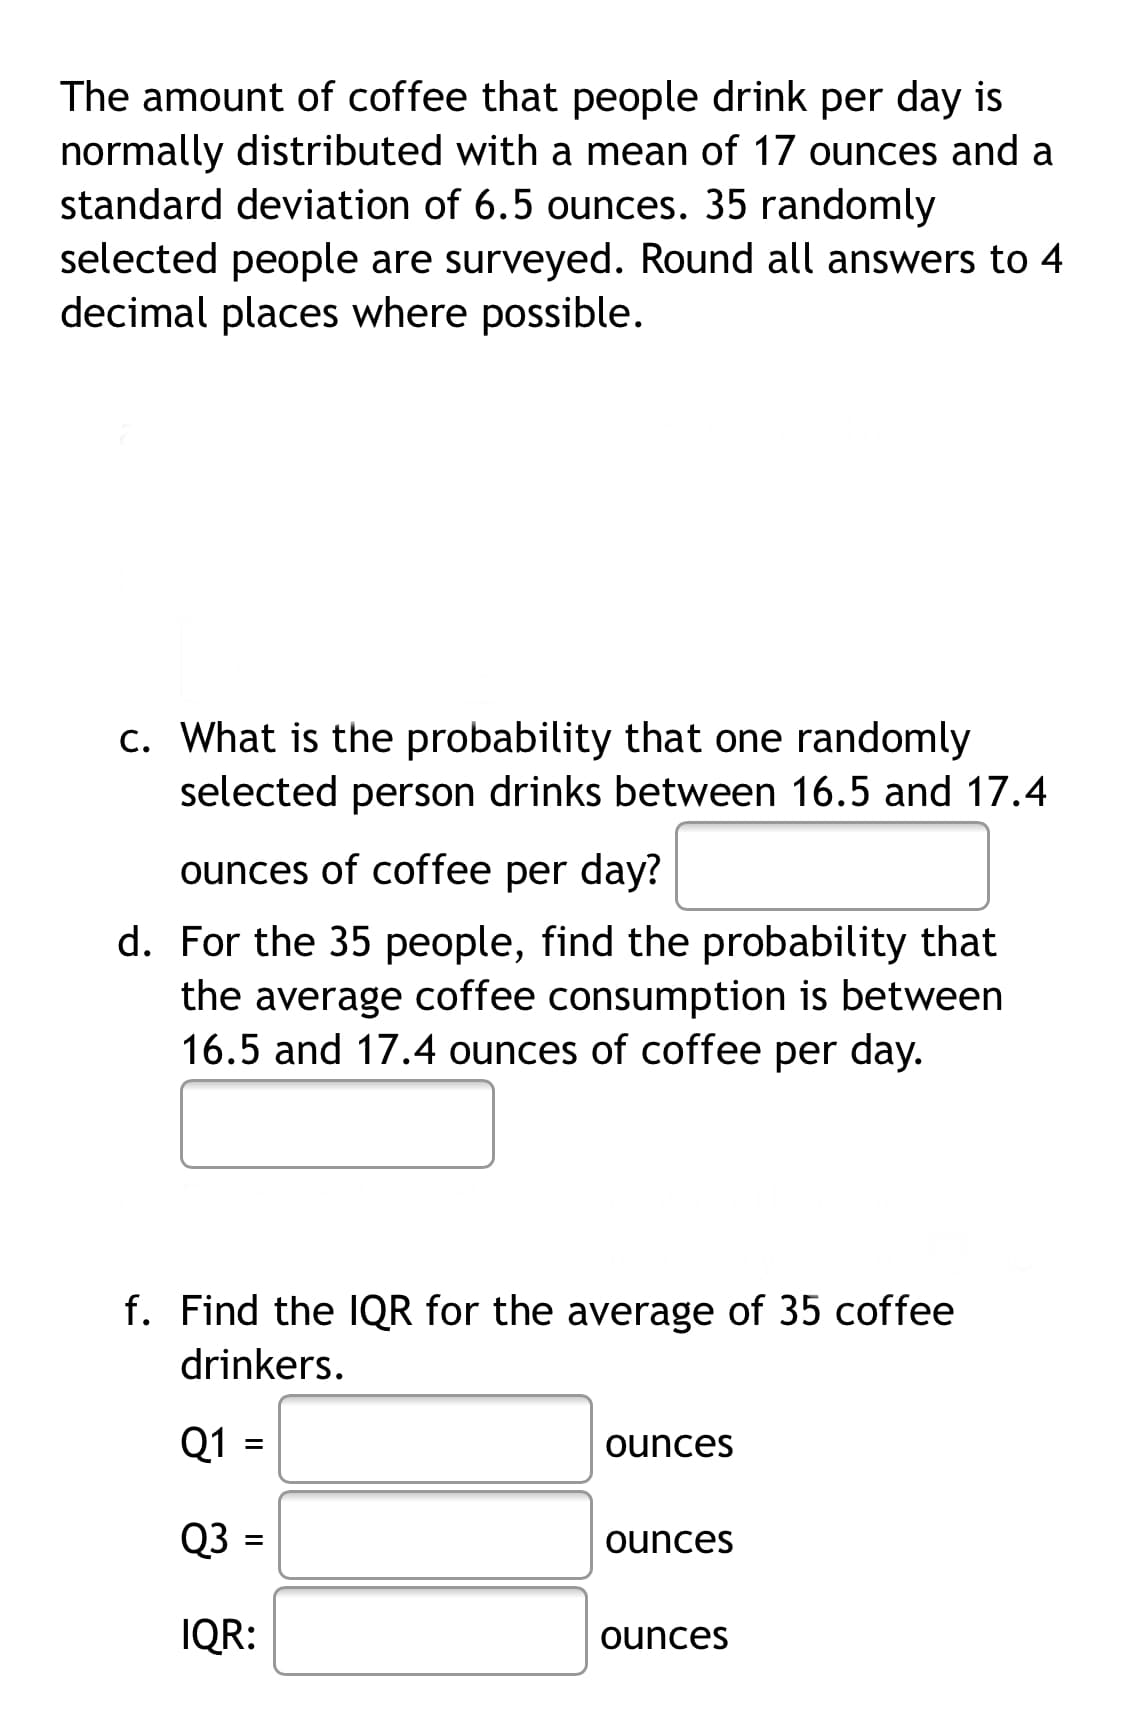 The amount of coffee that people drink per day is
normally distributed with a mean of 17 ounces and a
standard deviation of 6.5 ounces. 35 randomly
selected people are surveyed. Round all answers to 4
decimal places where possible.
c. What is the probability that one randomly
selected person drinks between 16.5 and 17.4
ounces of coffee per day?
d. For the 35 people, find the probability that
the average coffee consumption is between
16.5 and 17.4 ounces of coffee per day.
f. Find the 1QR for the average of 35 coffee
drinkers.
Q1
ounces
Q3
ounces
IQR:
ounces
II
